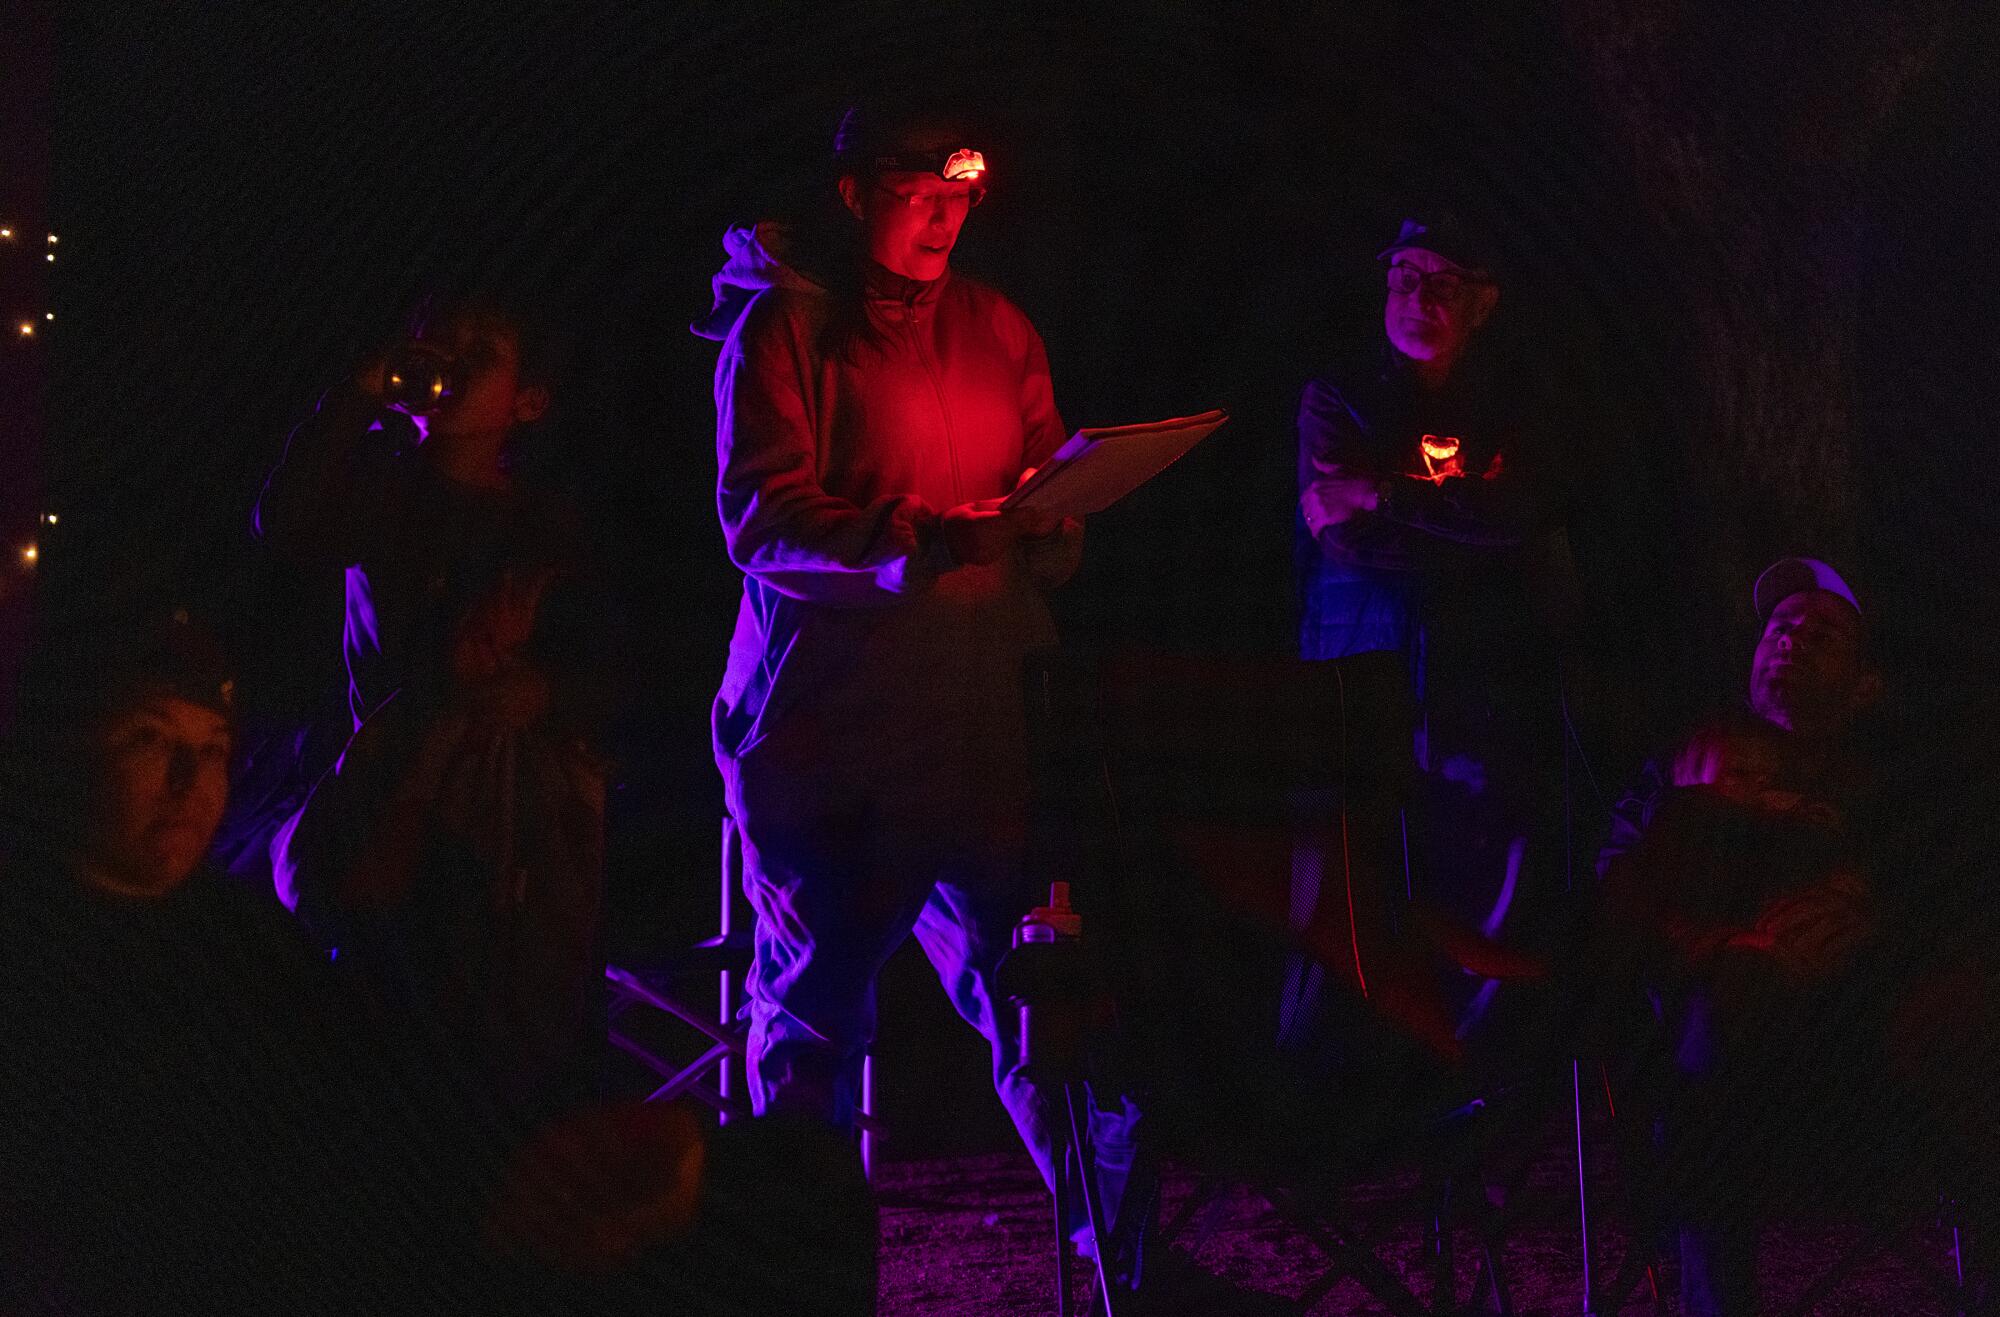  Dani Hsia, center, a headlamp illuminating her handwritten notes, speaks to a group sitting around a campfire. 